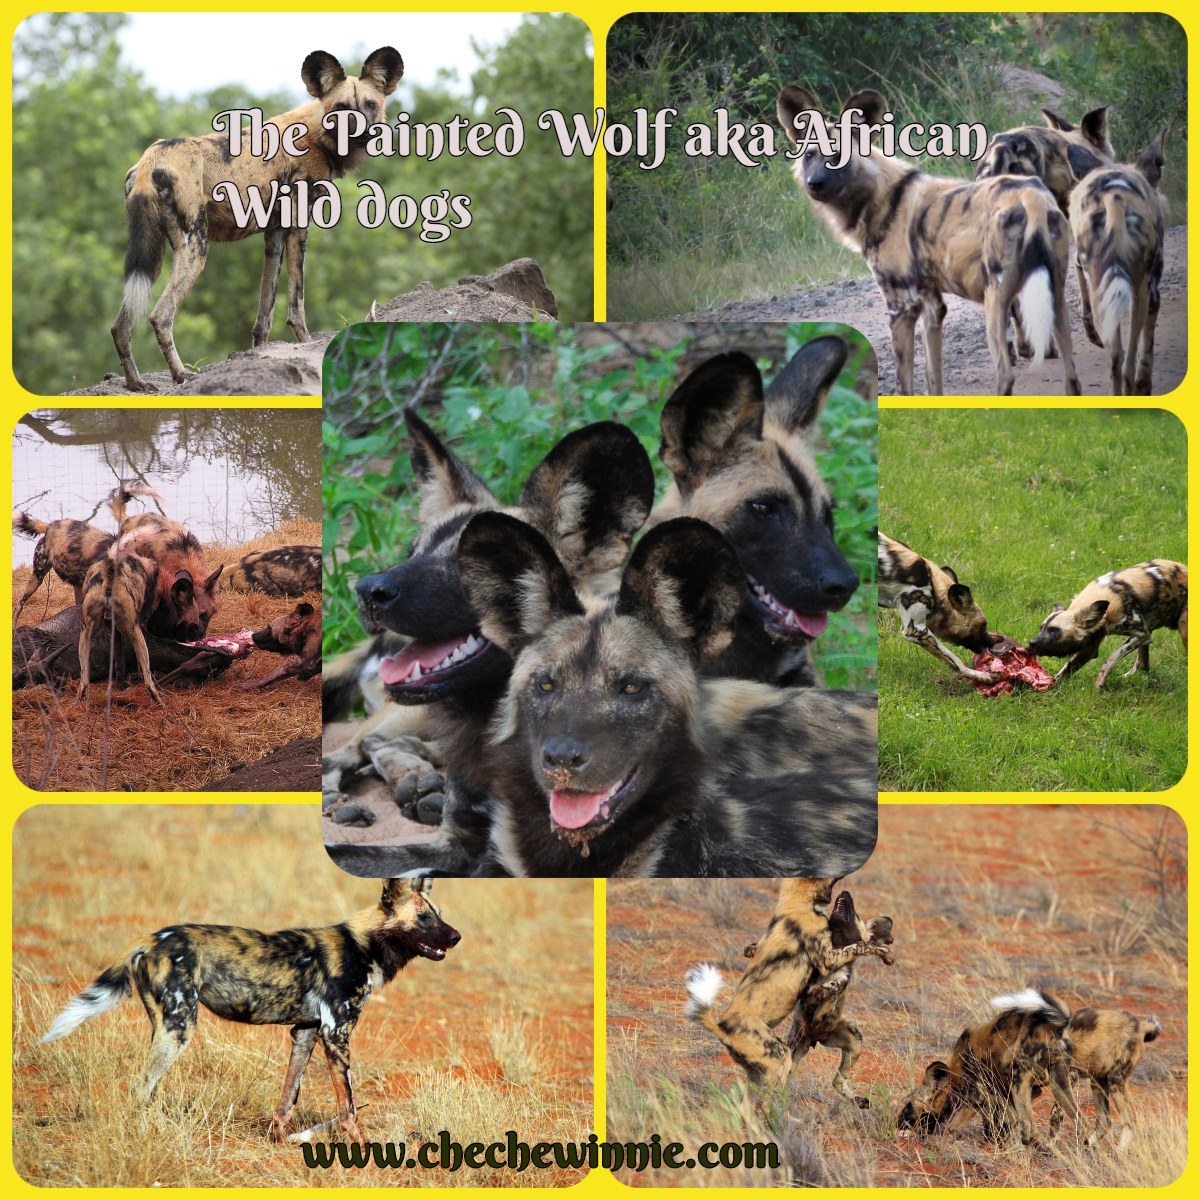 The Painted Wolf aka African Wild dogs